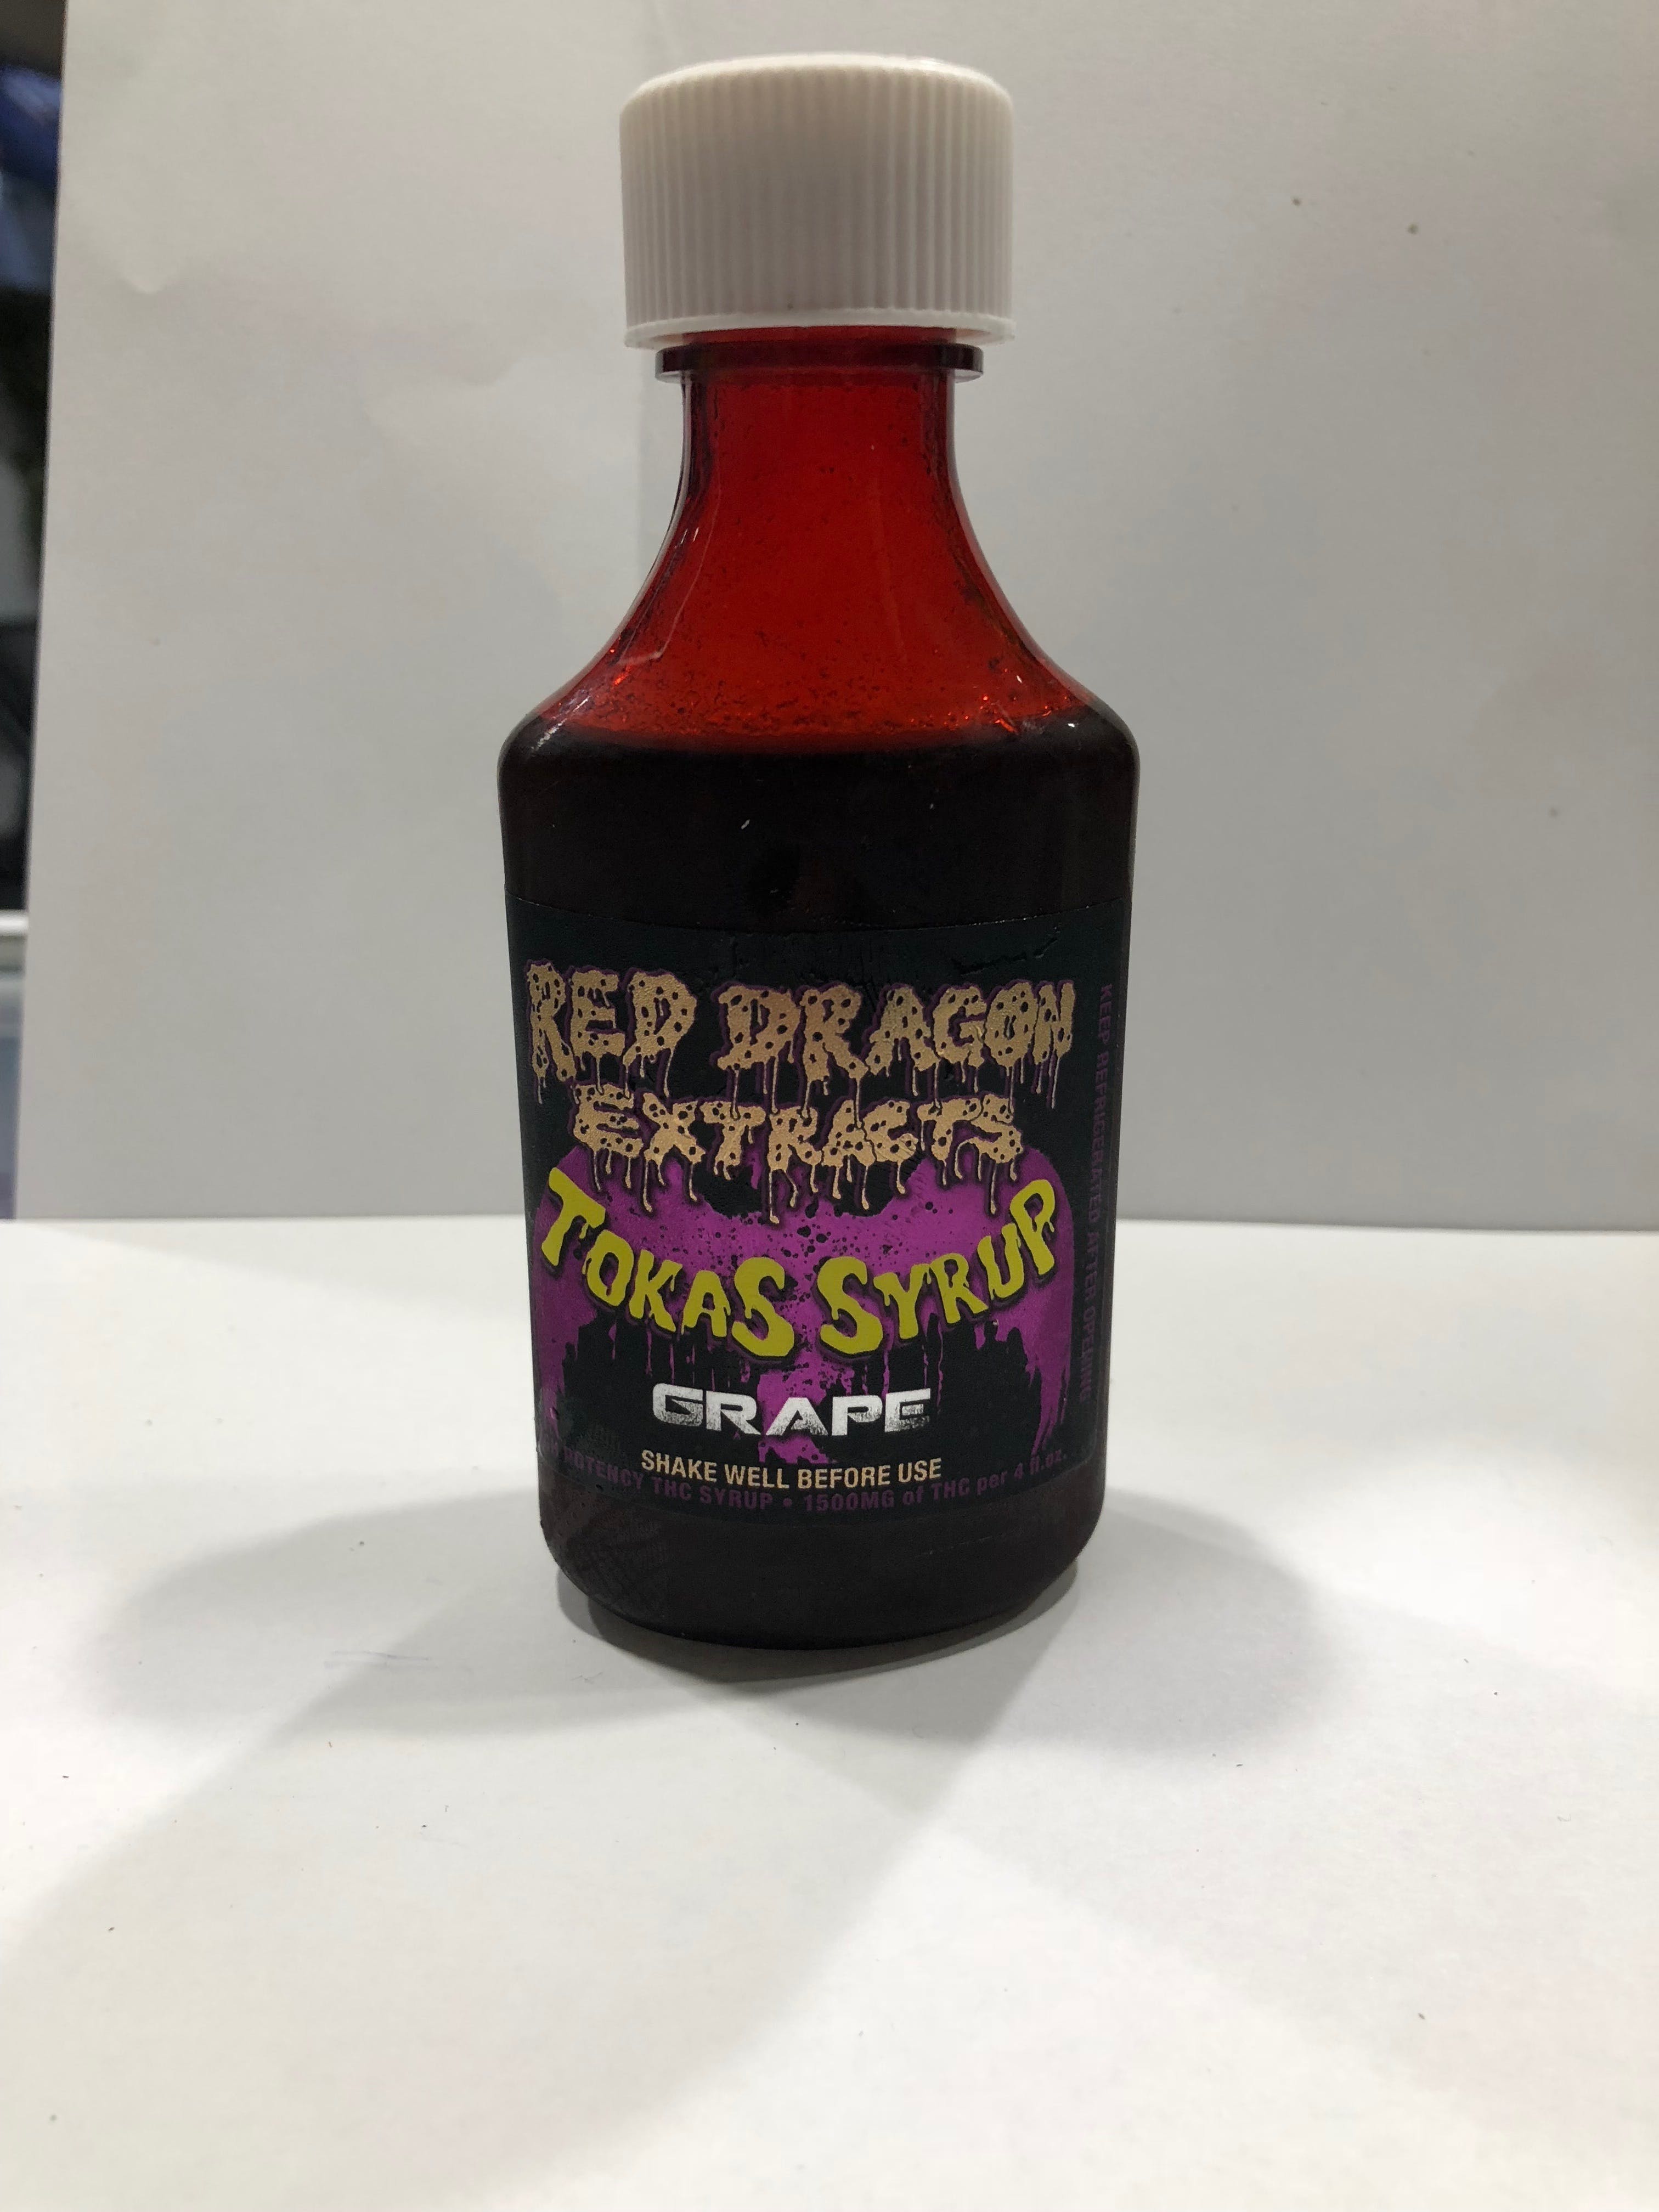 edible-red-dragon-extracts-syrup-2000mg